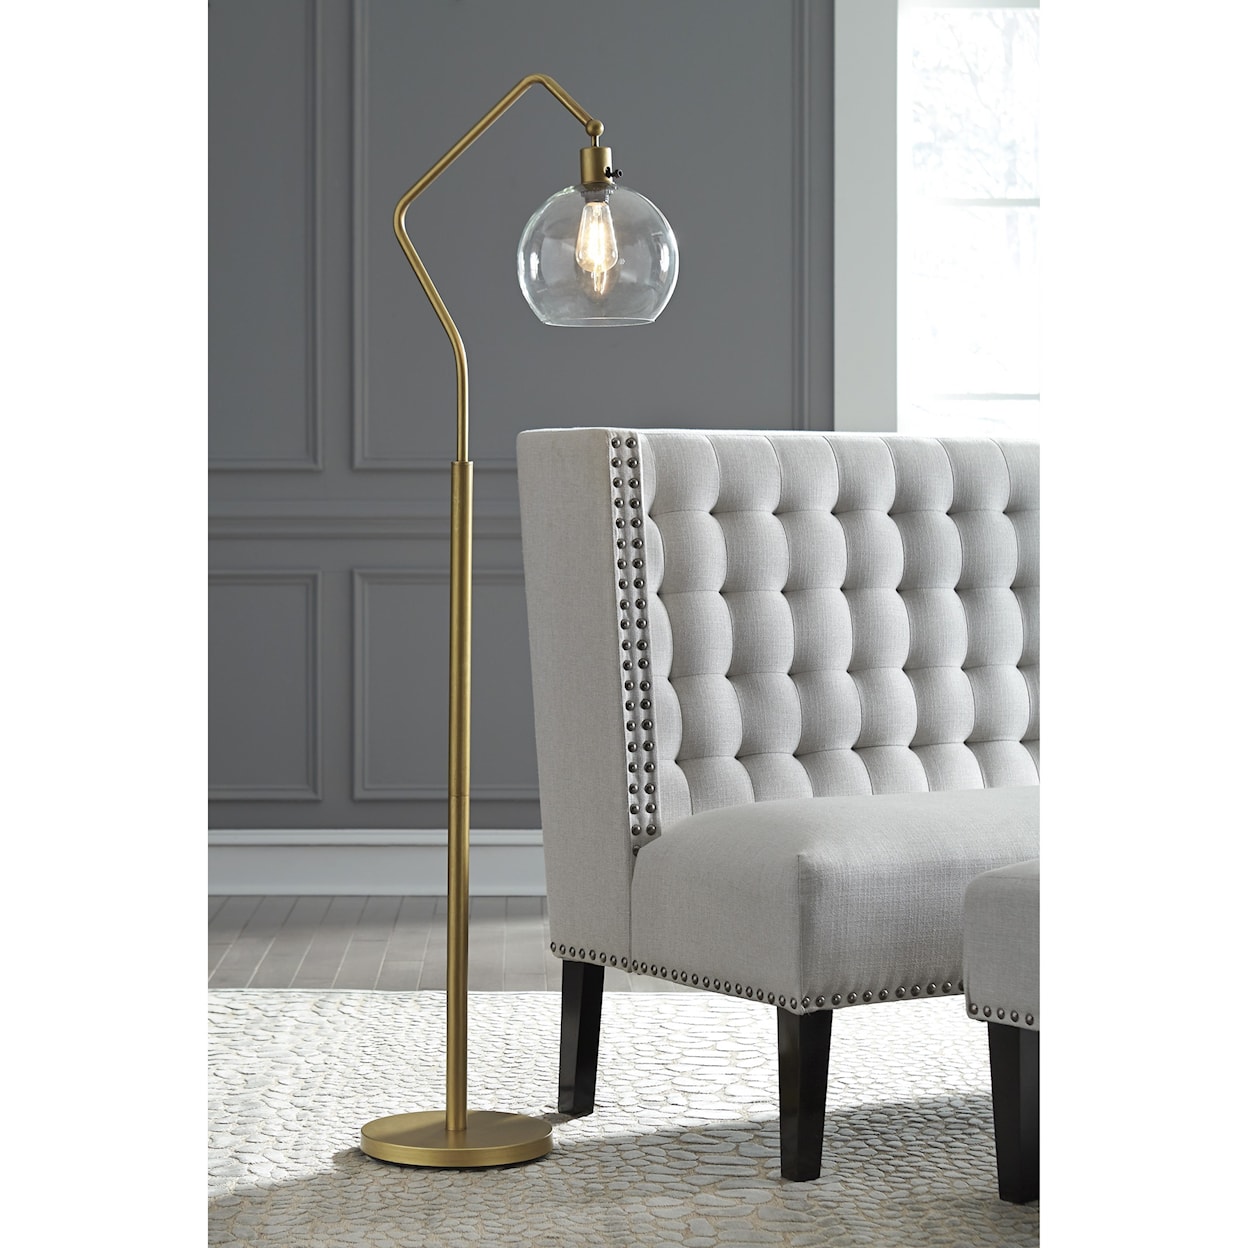 Signature Design by Ashley Lamps - Vintage Style Marilee Antique Brass Metal Floor Lamp